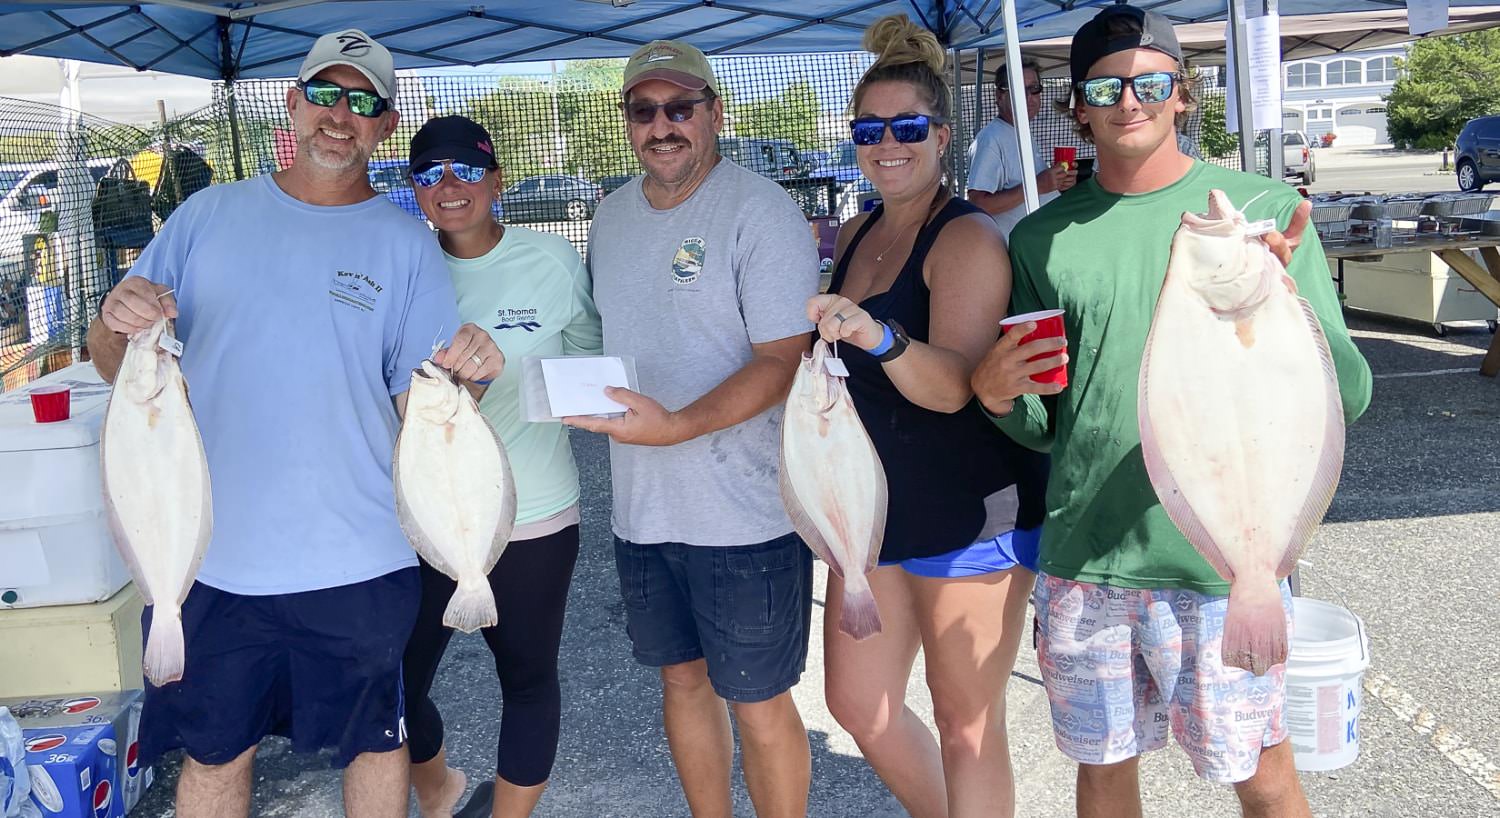 Group of people standing and holding large white round fish that they caught fishing